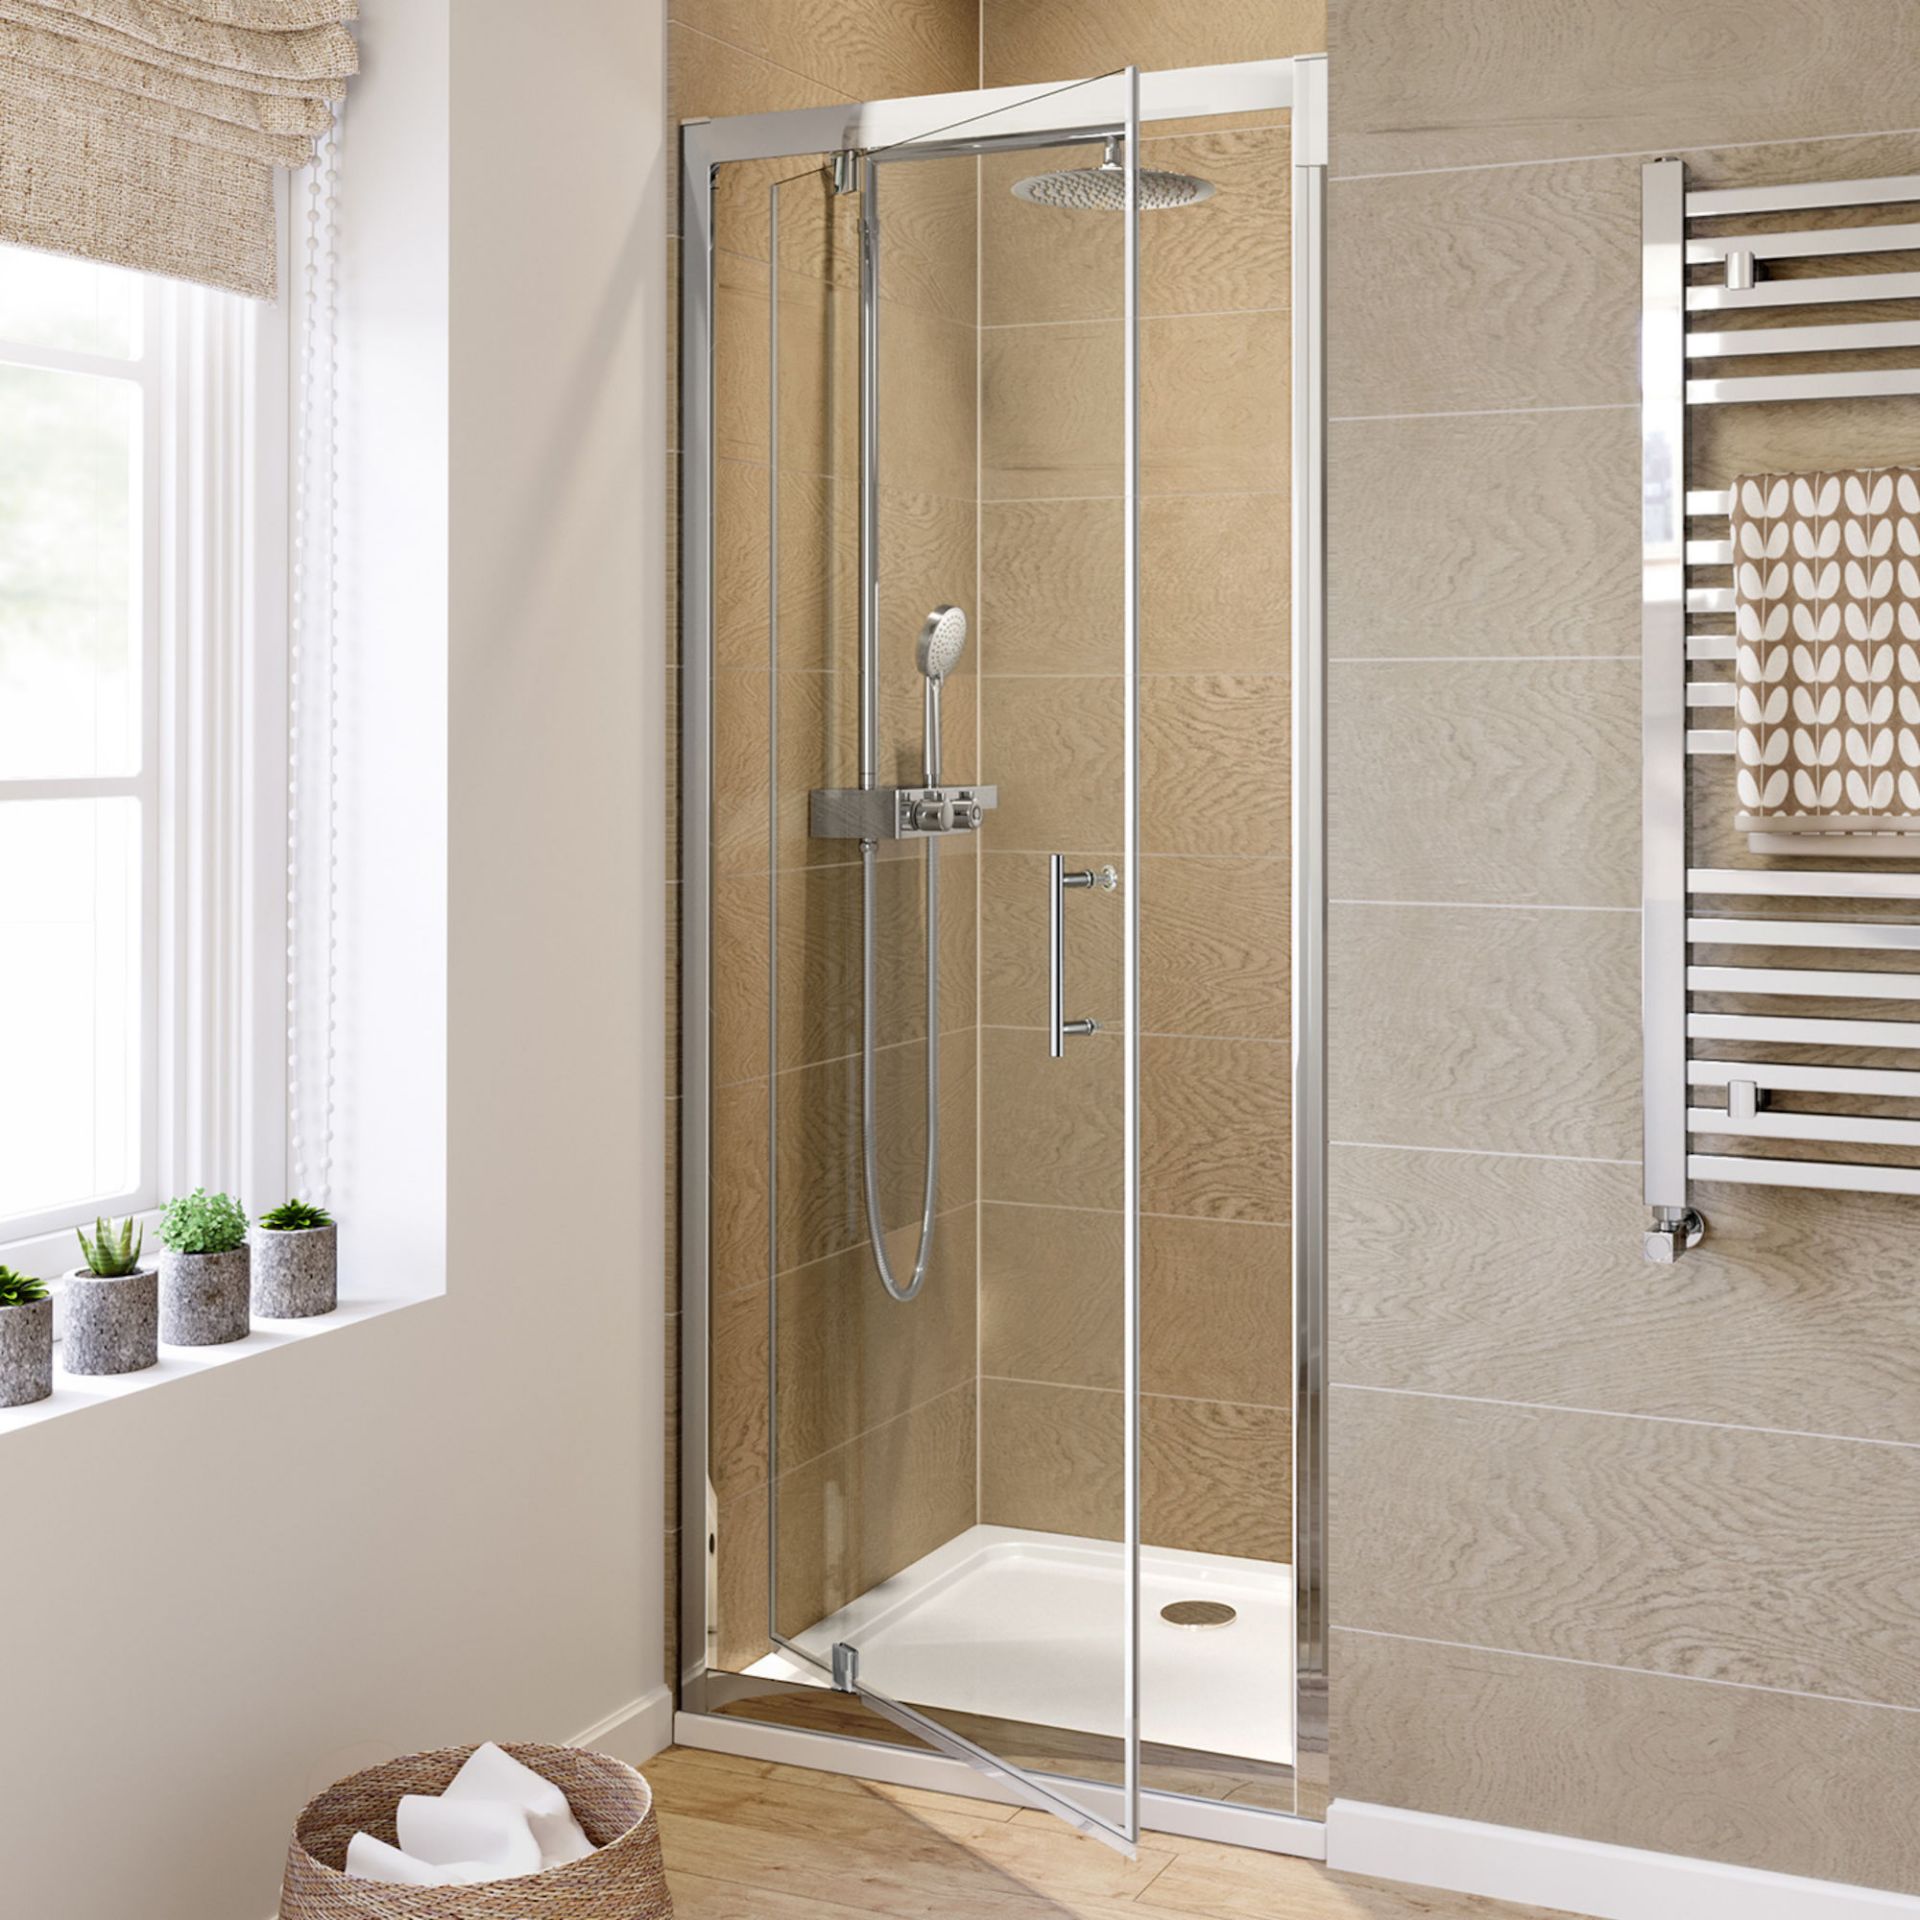 (VN27) 900mm - 6mm - Elements Pivot Shower Door. RRP £299.99. 6mm Safety Glass Fully waterproof